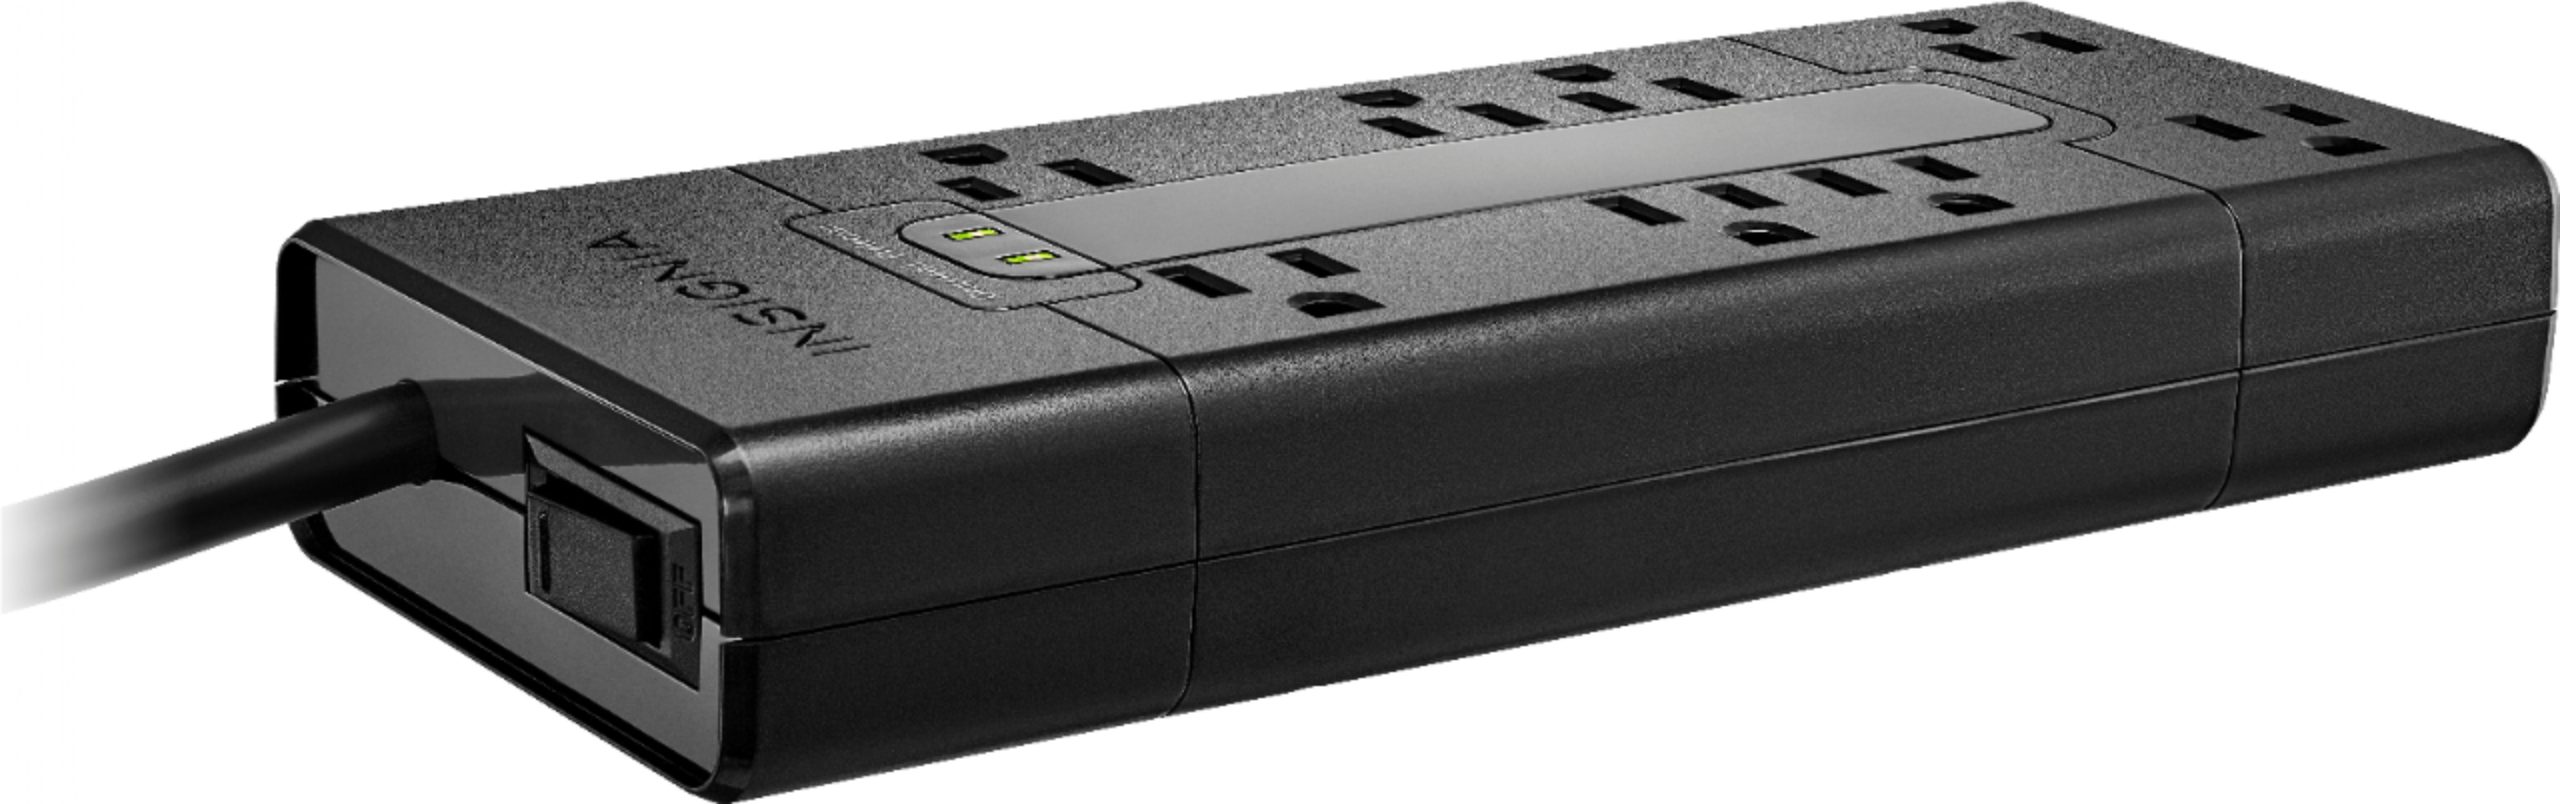 Insignia™ – 8-Outlet Surge Protector Strip – Black – Just $19.99 at Best Buy